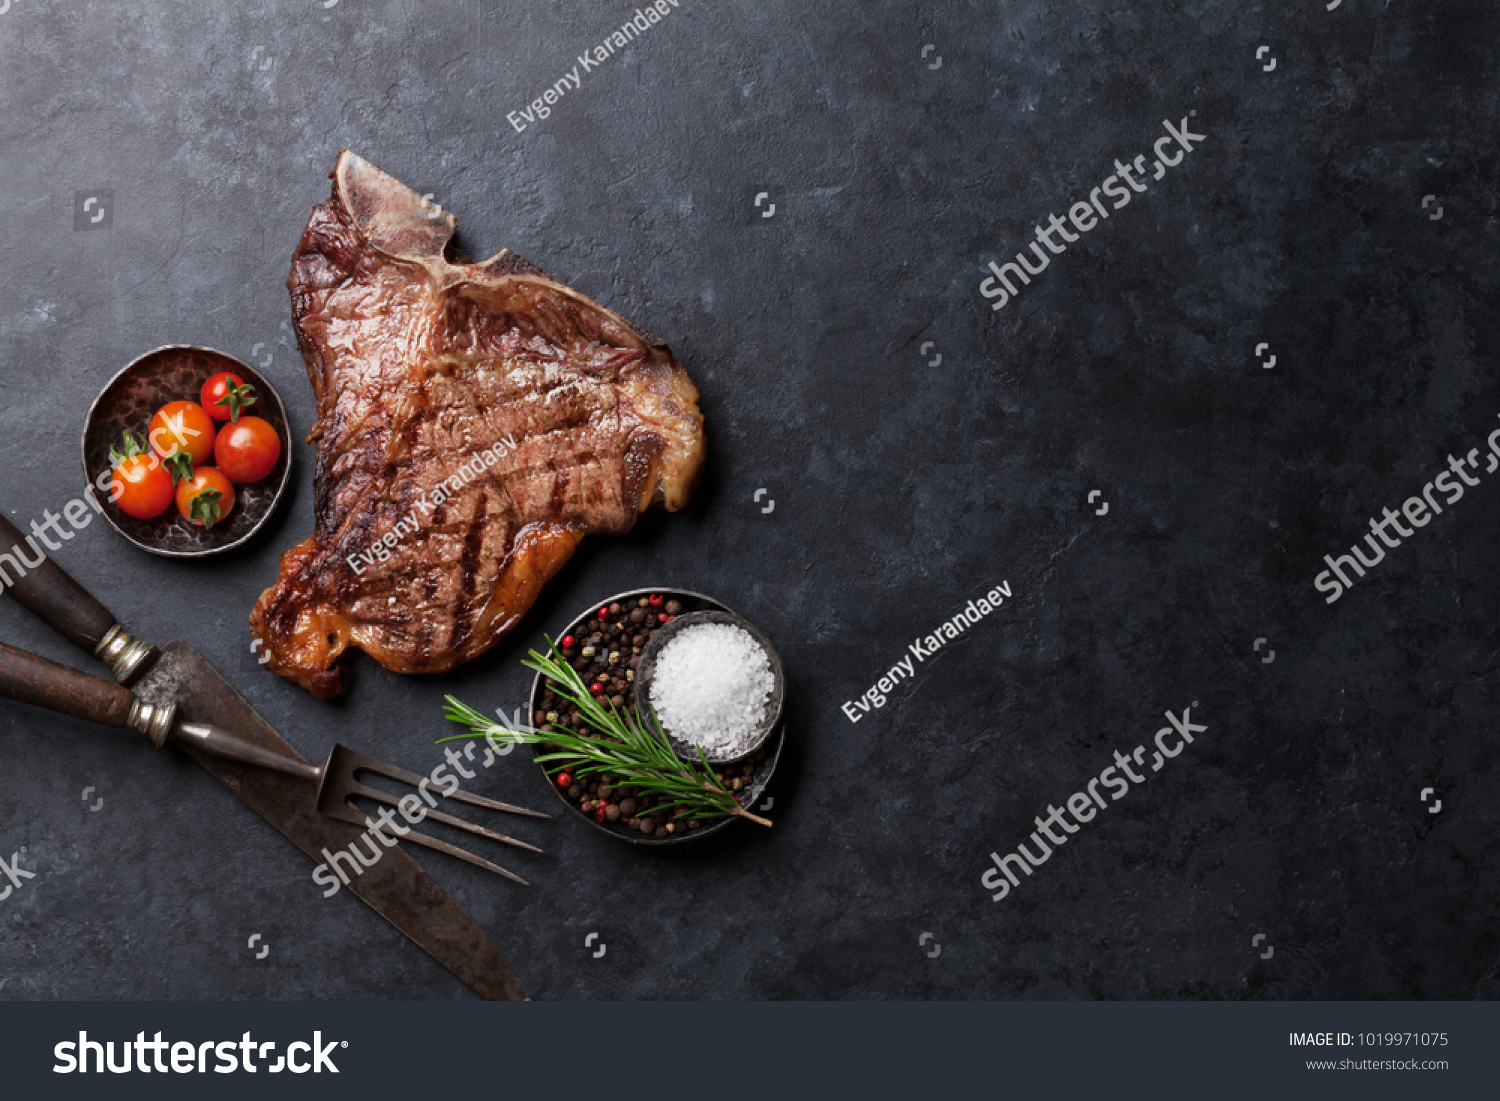 Grilled T-bone steak on stone table. Top view with copy space #1019971075